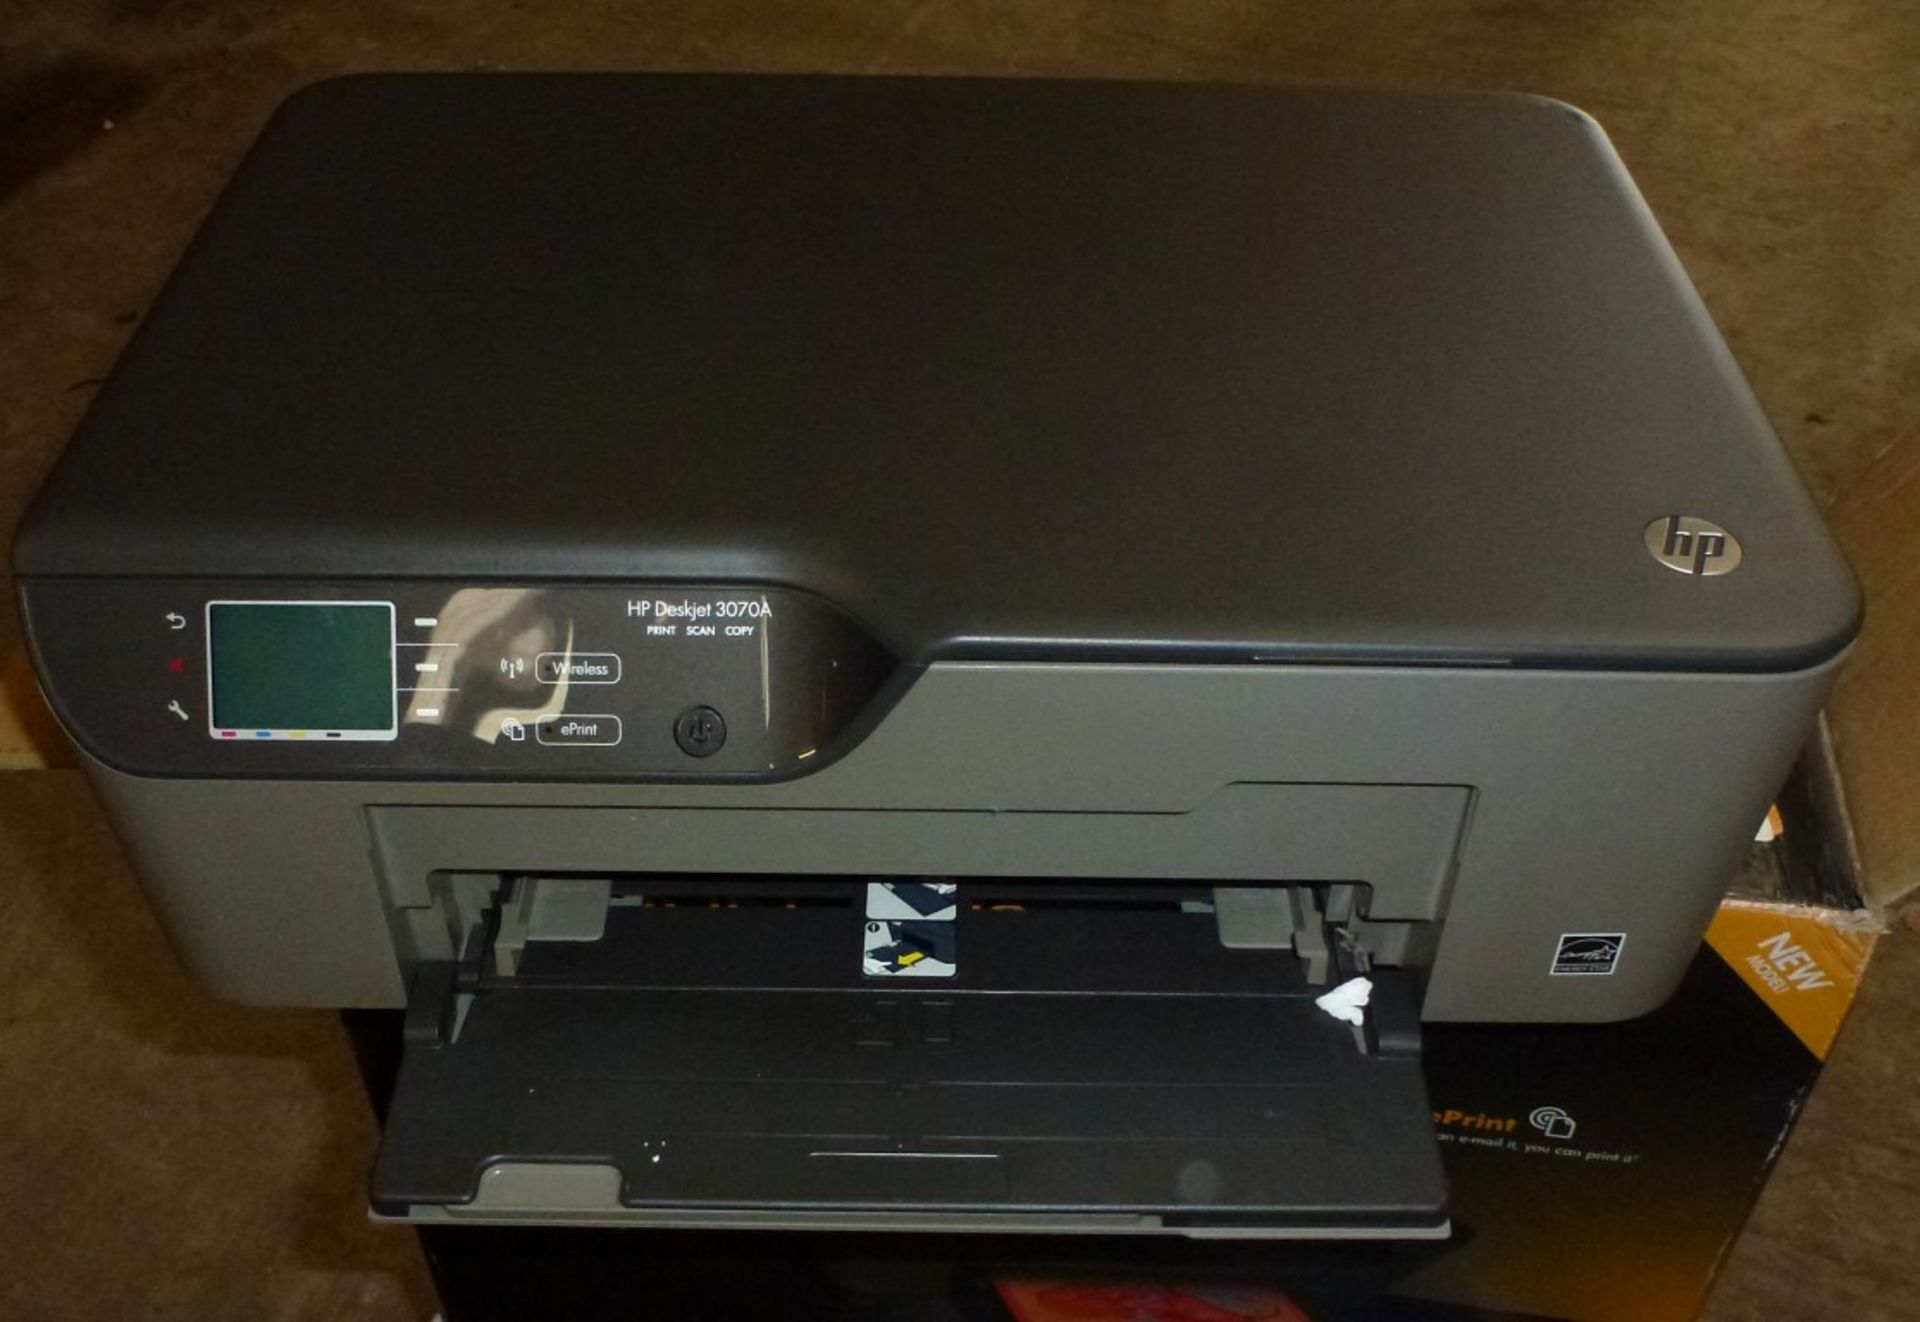 8 x Various Printers - Models Include Epson Stylus SX535WD, HP Deskjet 3070A, HP Photosmart 5510, - Image 6 of 18